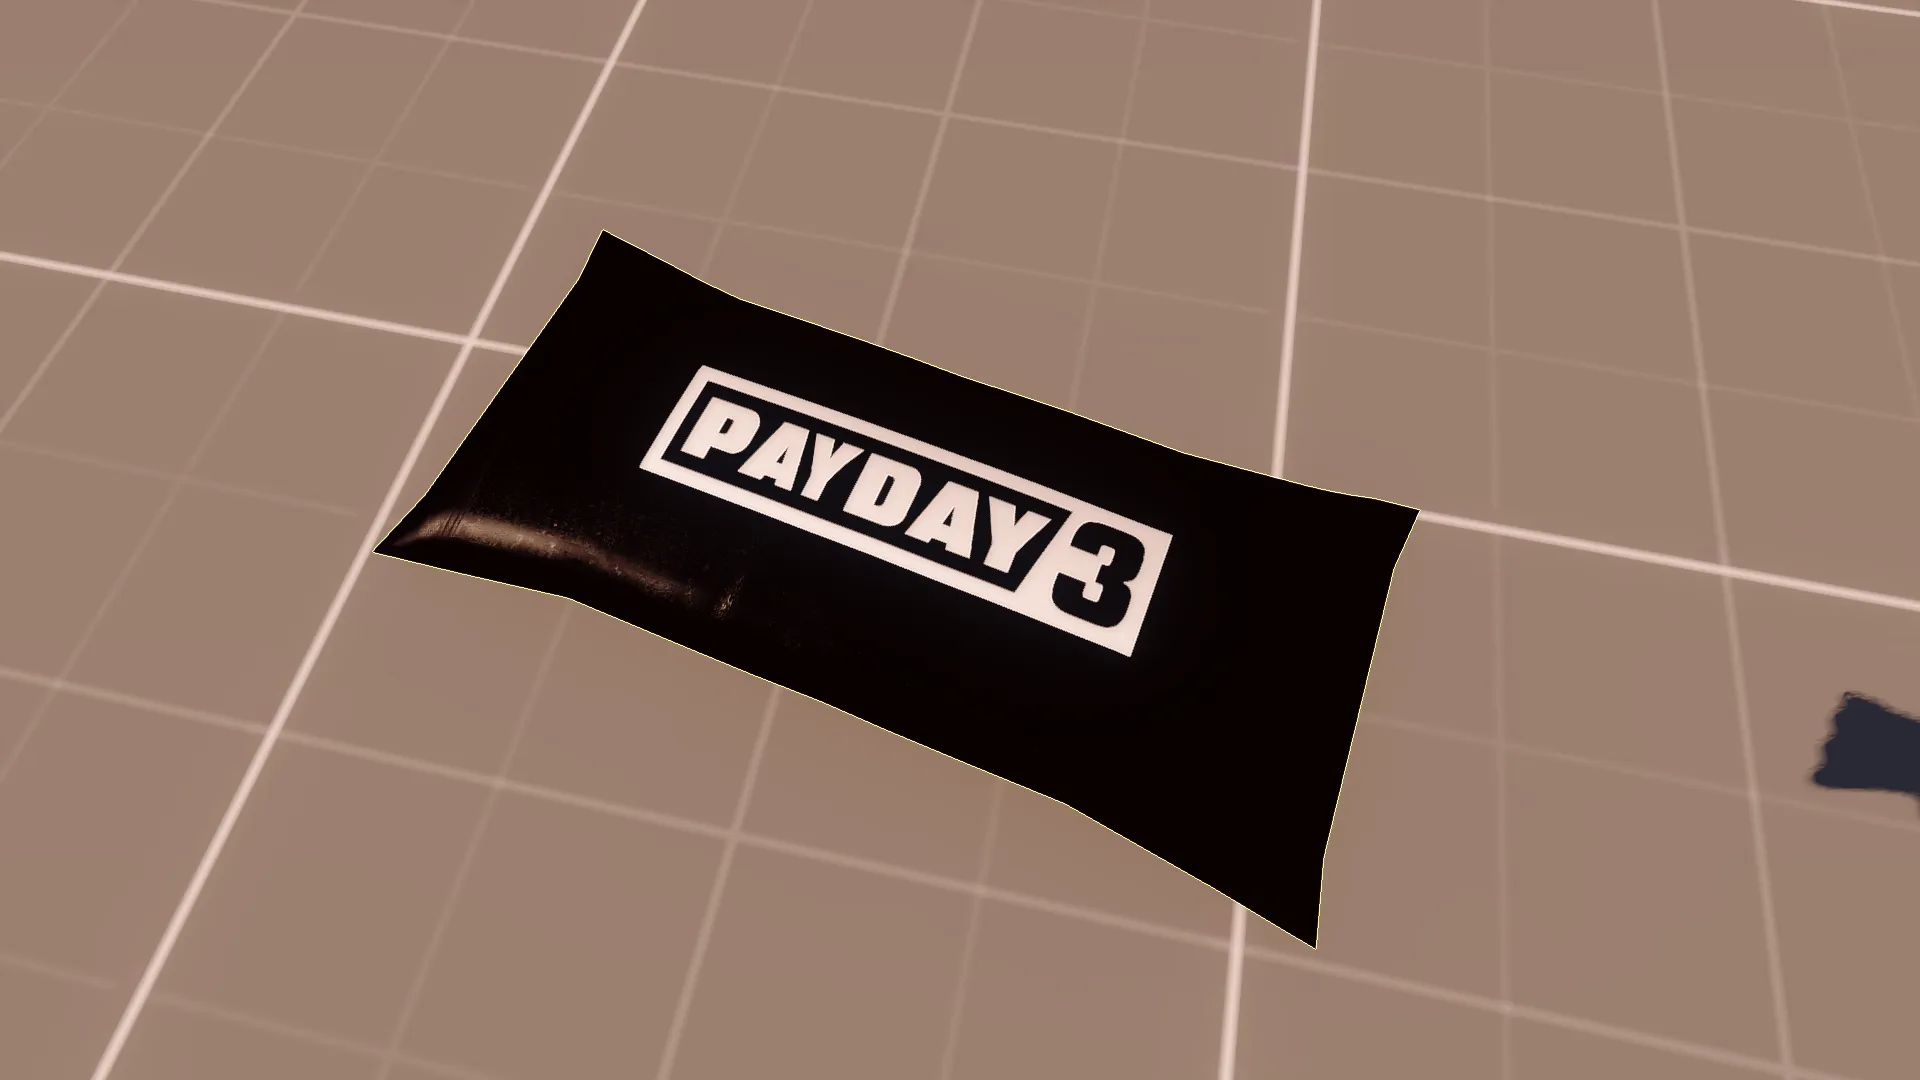 Recolor Crossplay Icons - PAYDAY 3 Mods - ModWorkshop